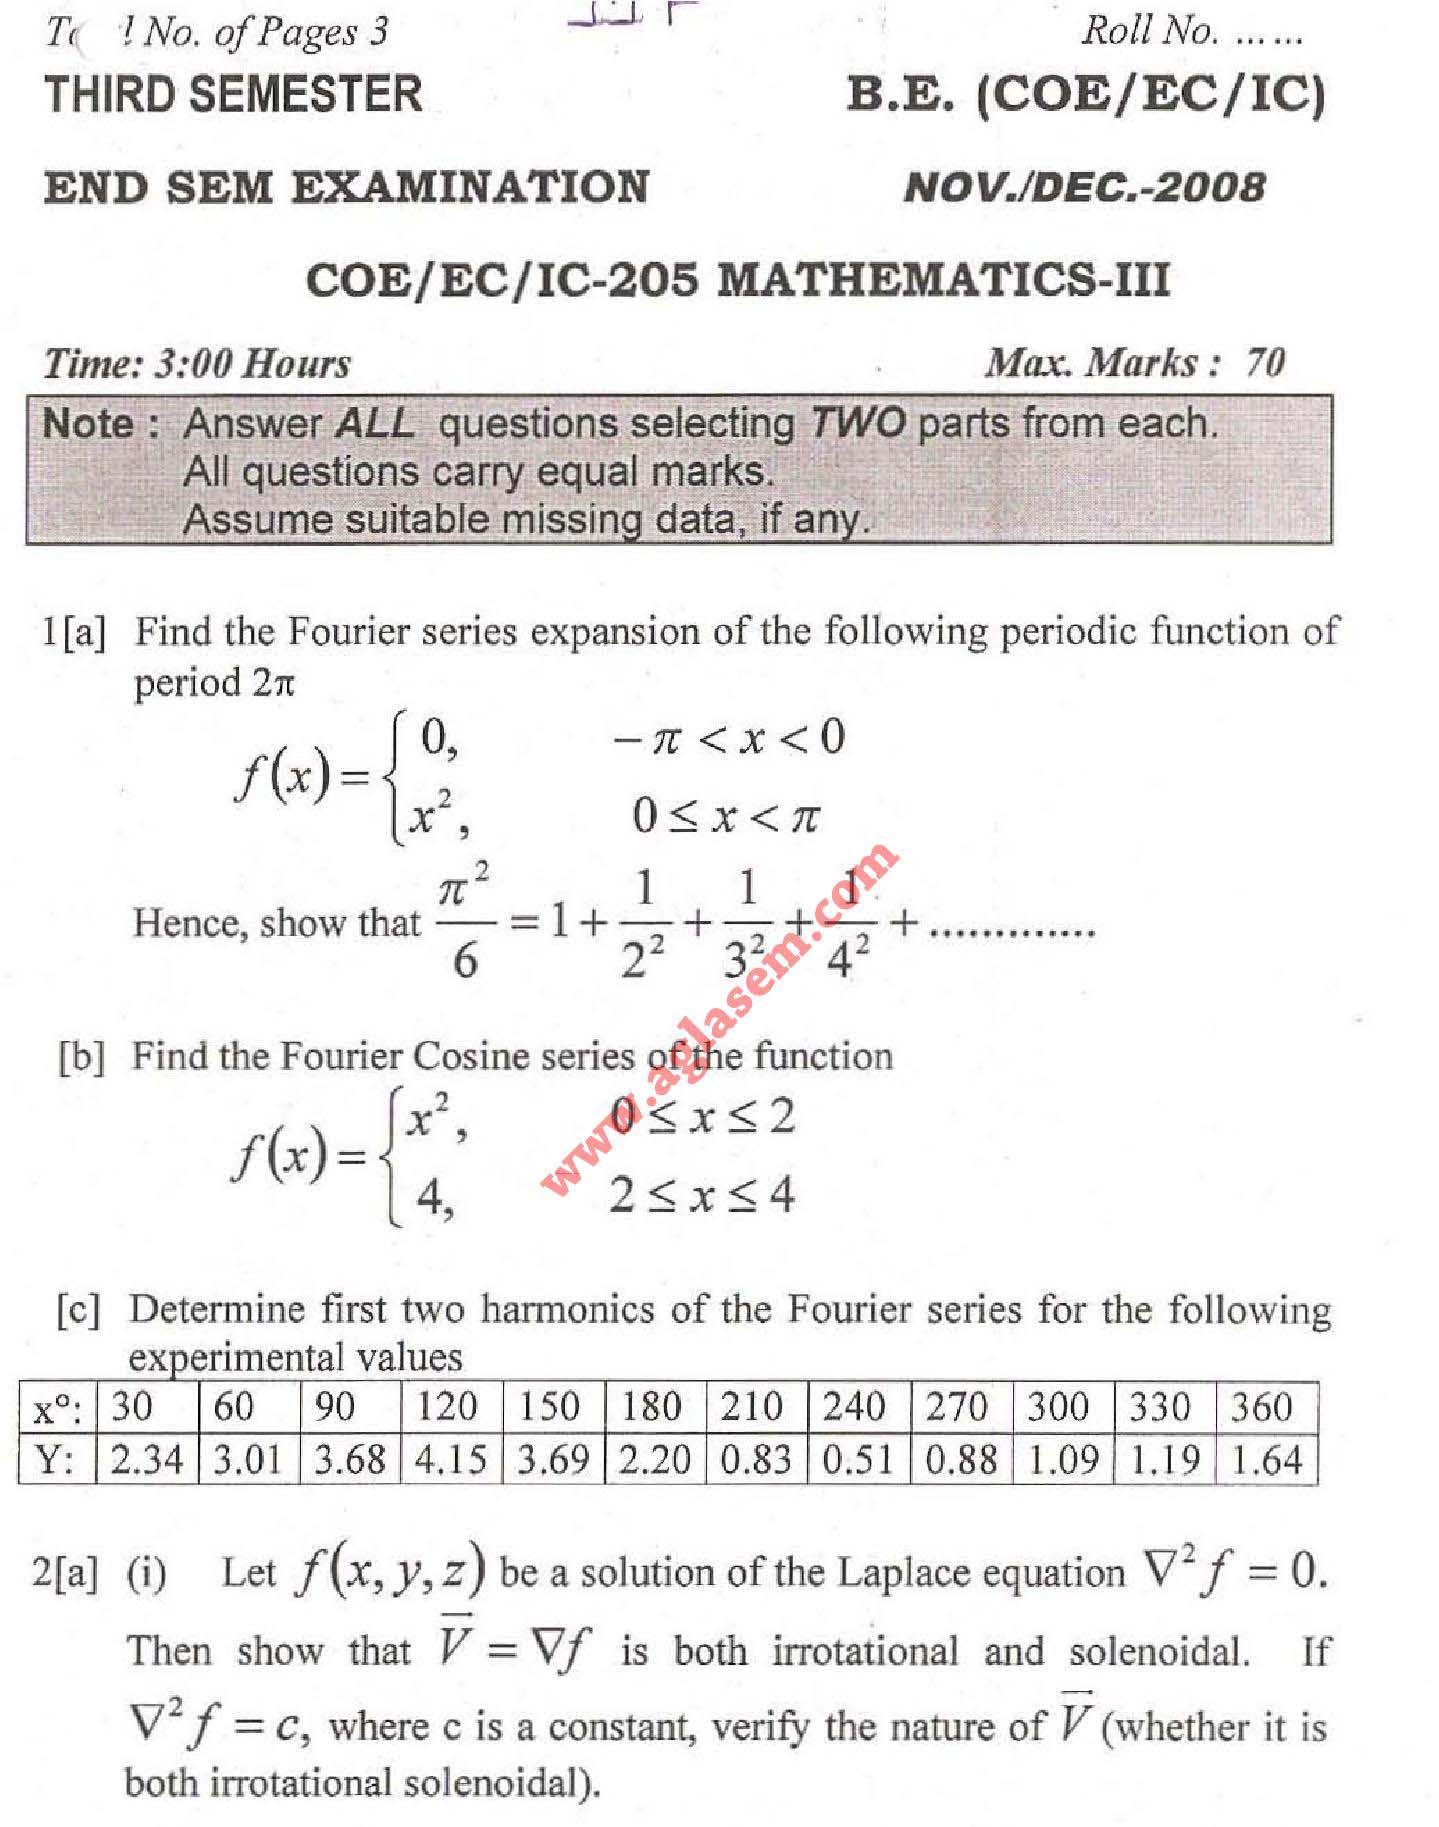 NSIT Question Papers 2008  3 Semester - End Sem - COE-EC-IC-205